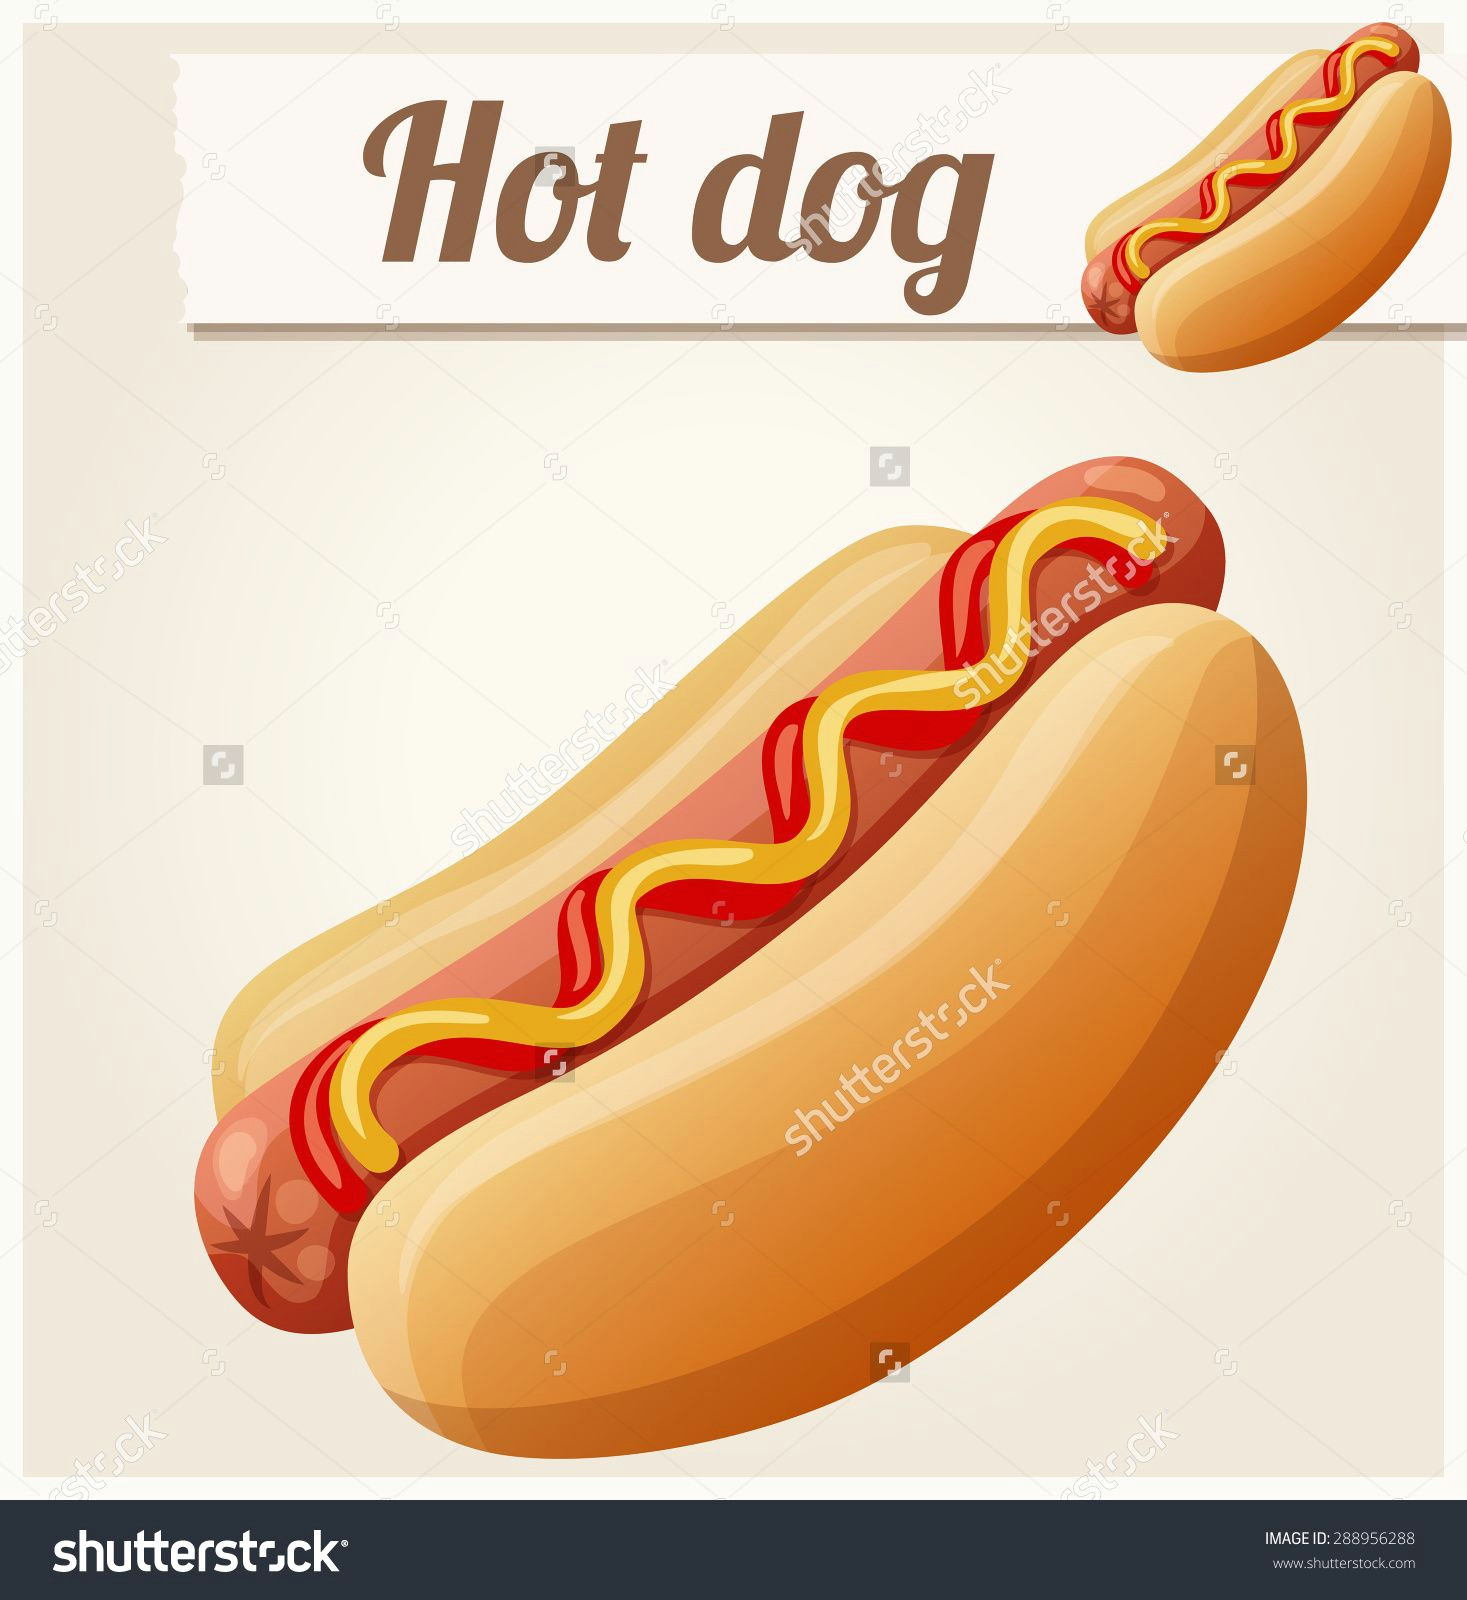 Drawing Of A Hot Dog Hot Dog Detailed Vector Icon Series Of Food and Drink and